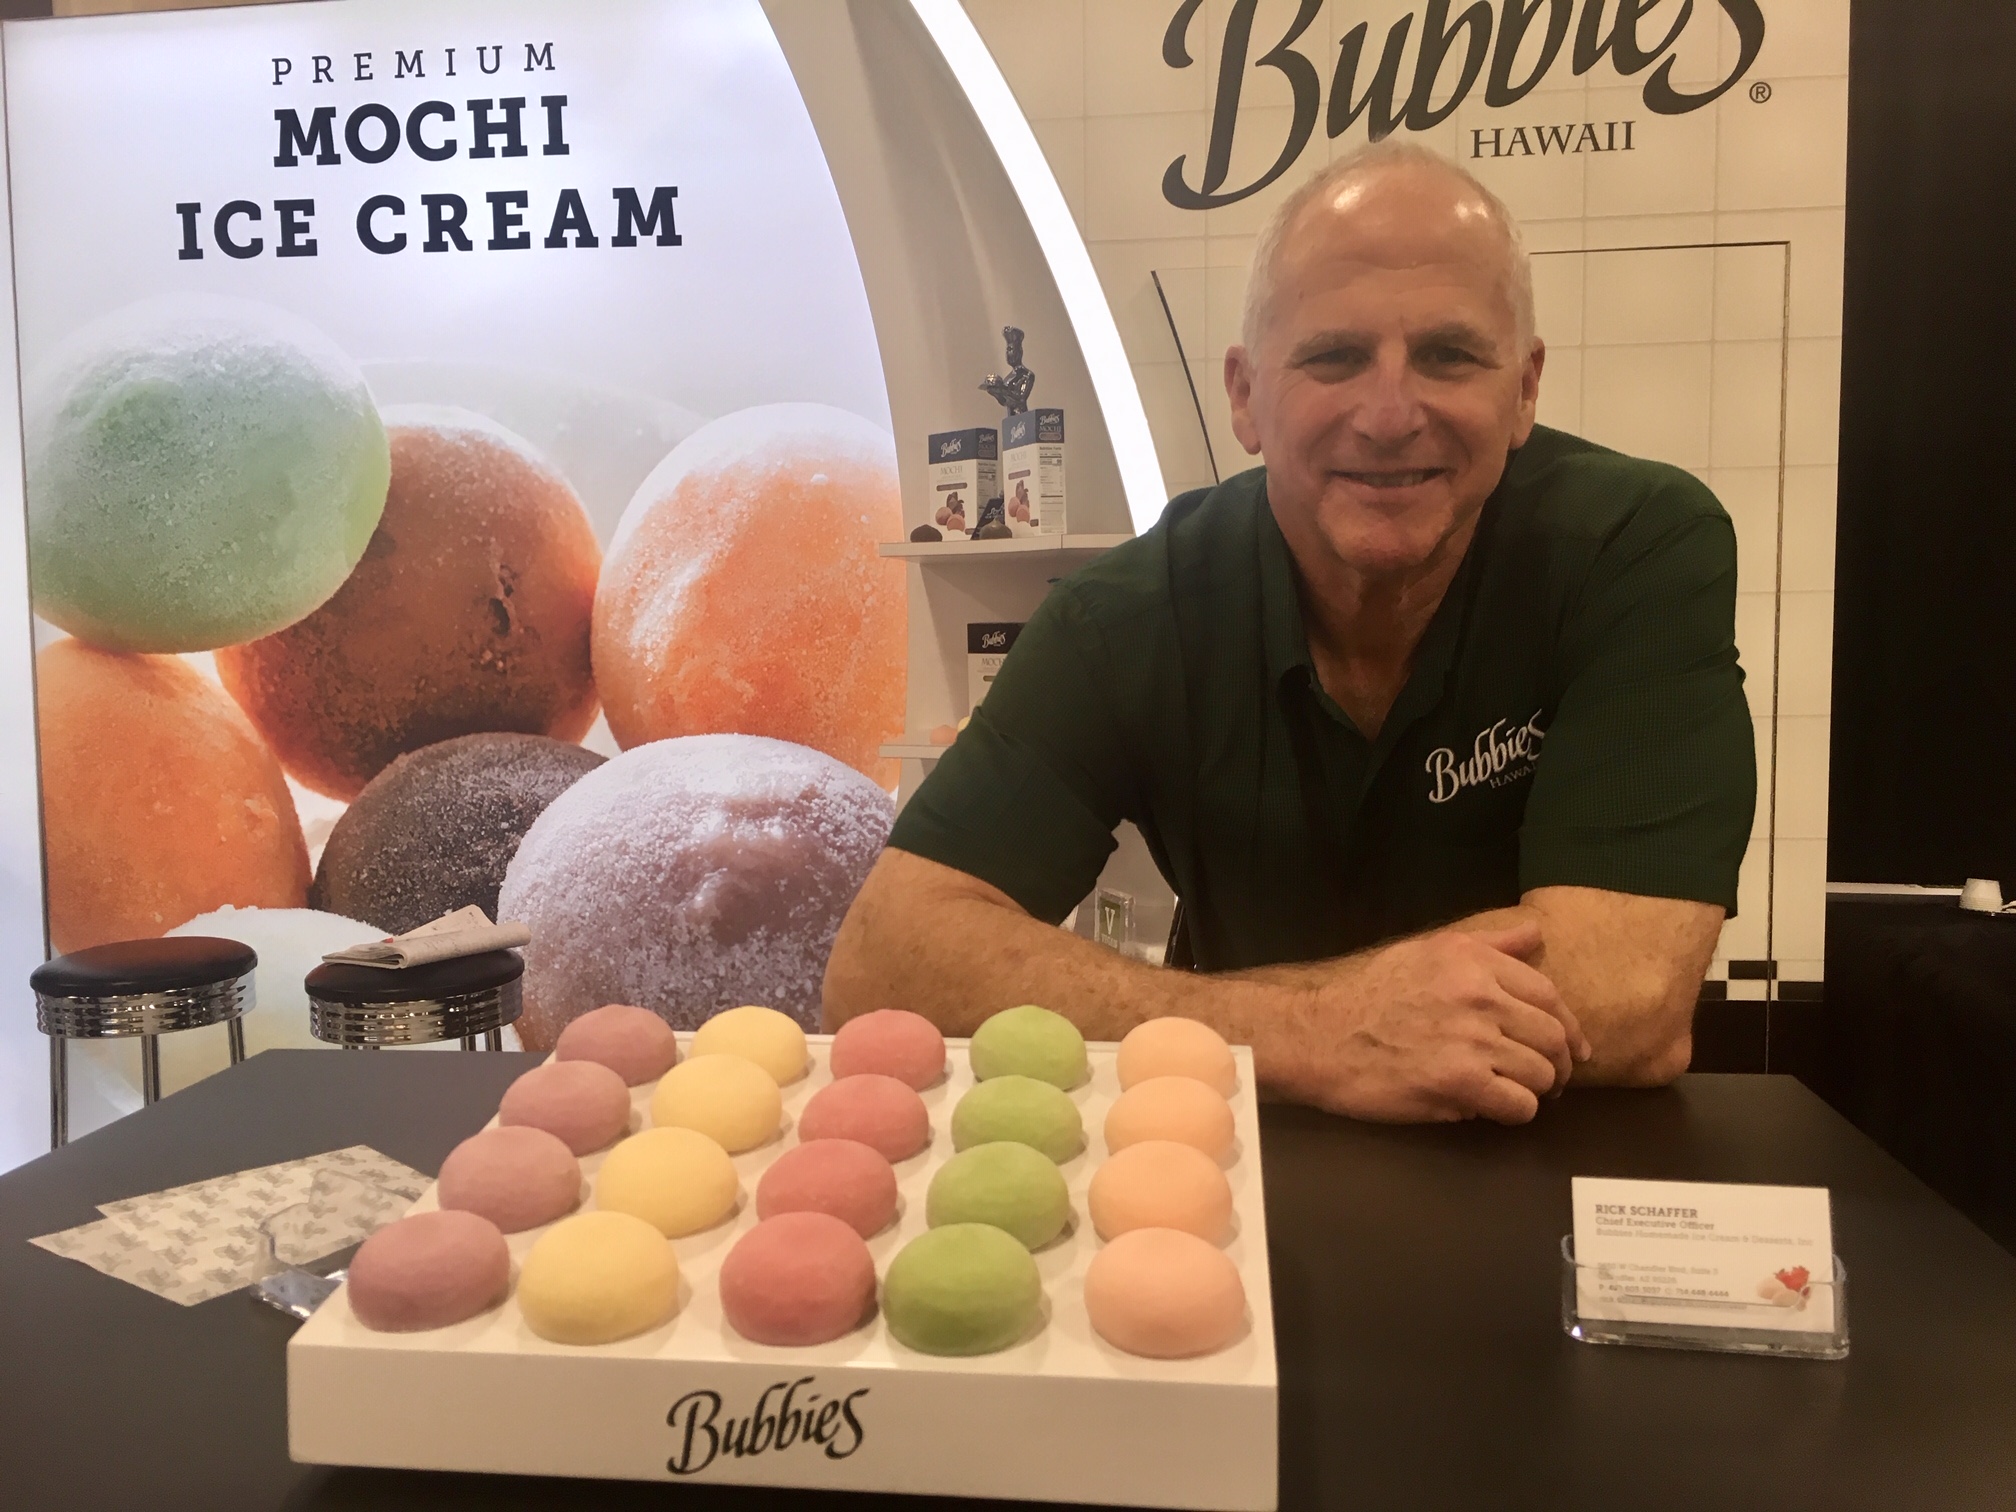 the-bubbies-mochi-brand-is-on-fire-says-ceo